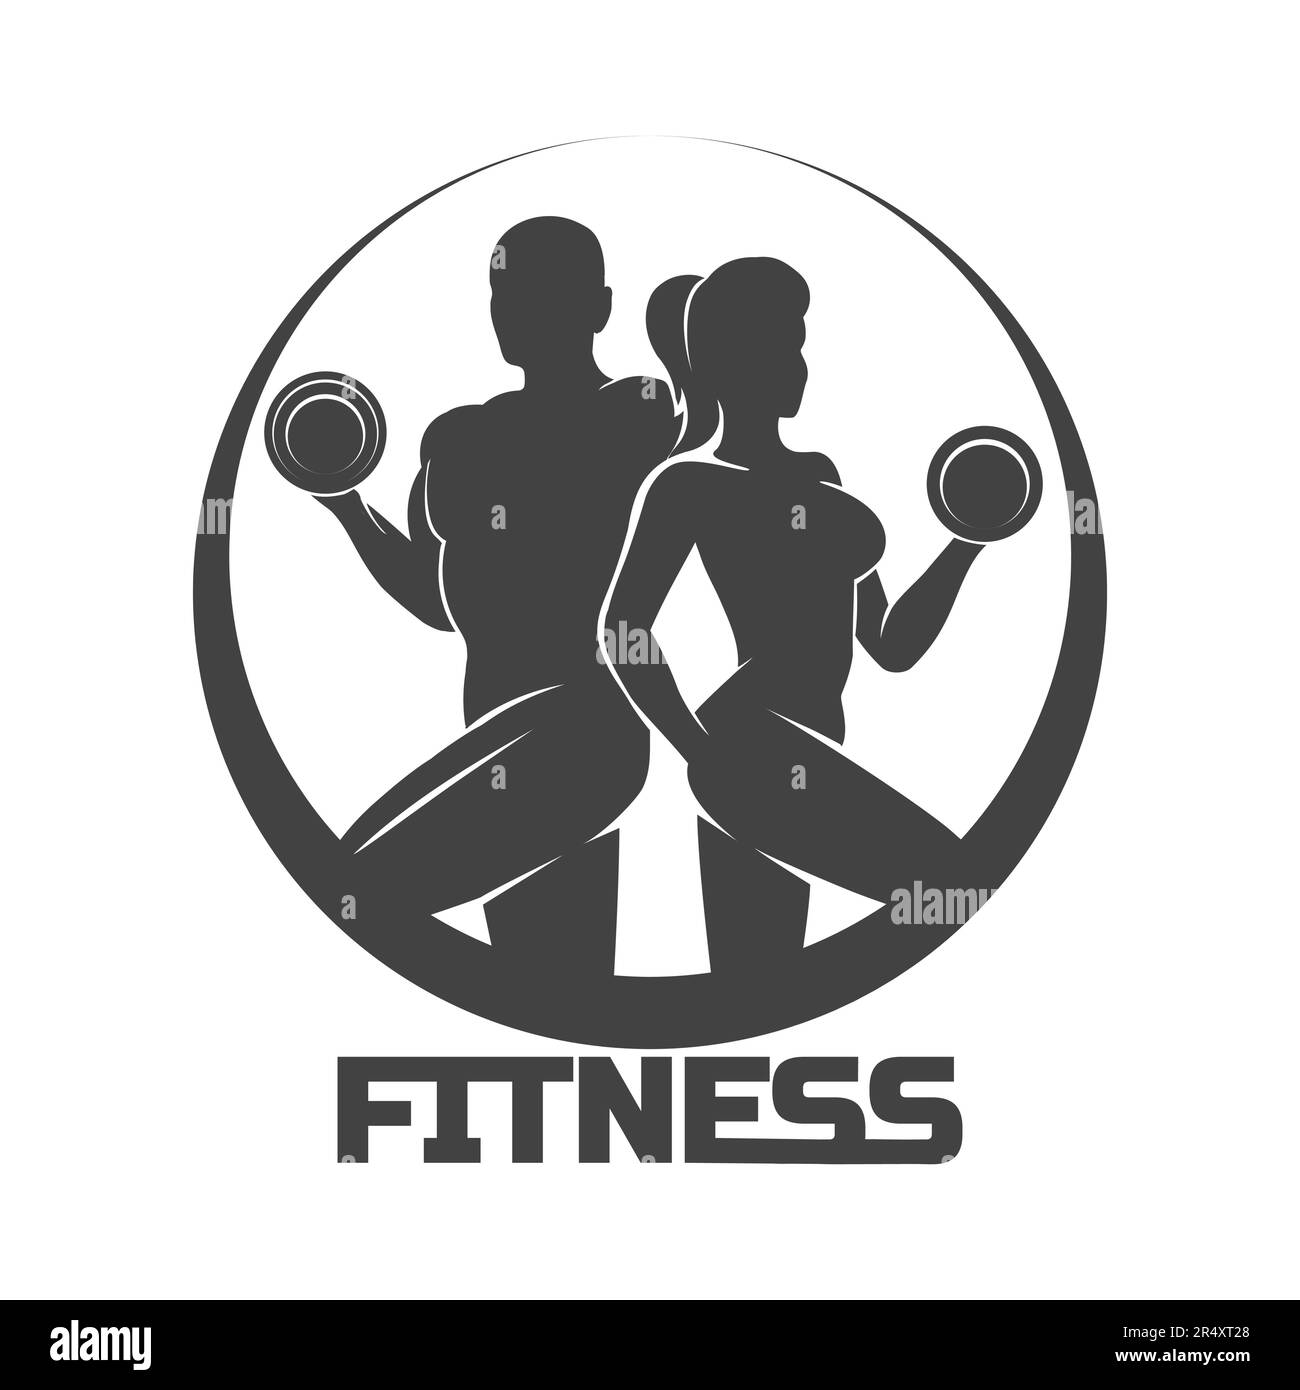 Gym symbol Black and White Stock Photos & Images - Page 2 - Alamy